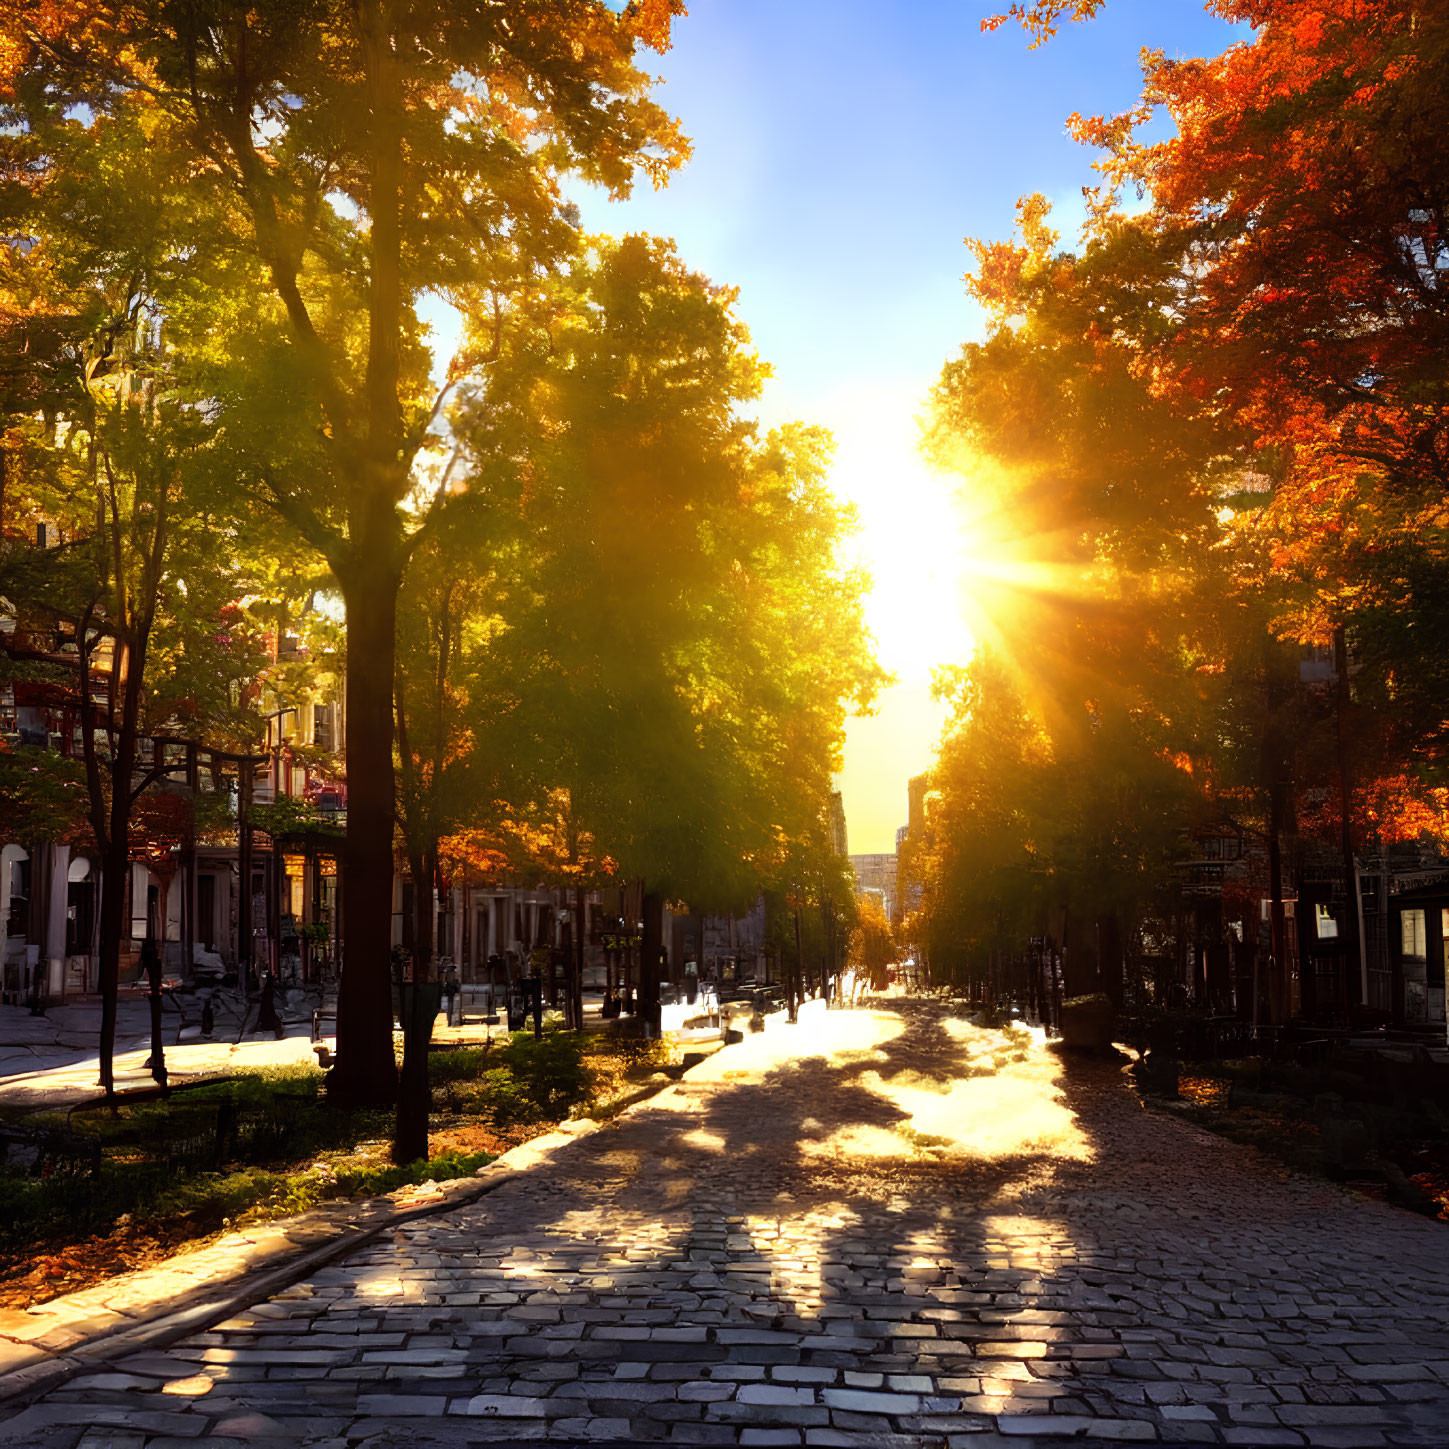 Scenic city street with tree-lined cobblestone path at sunset